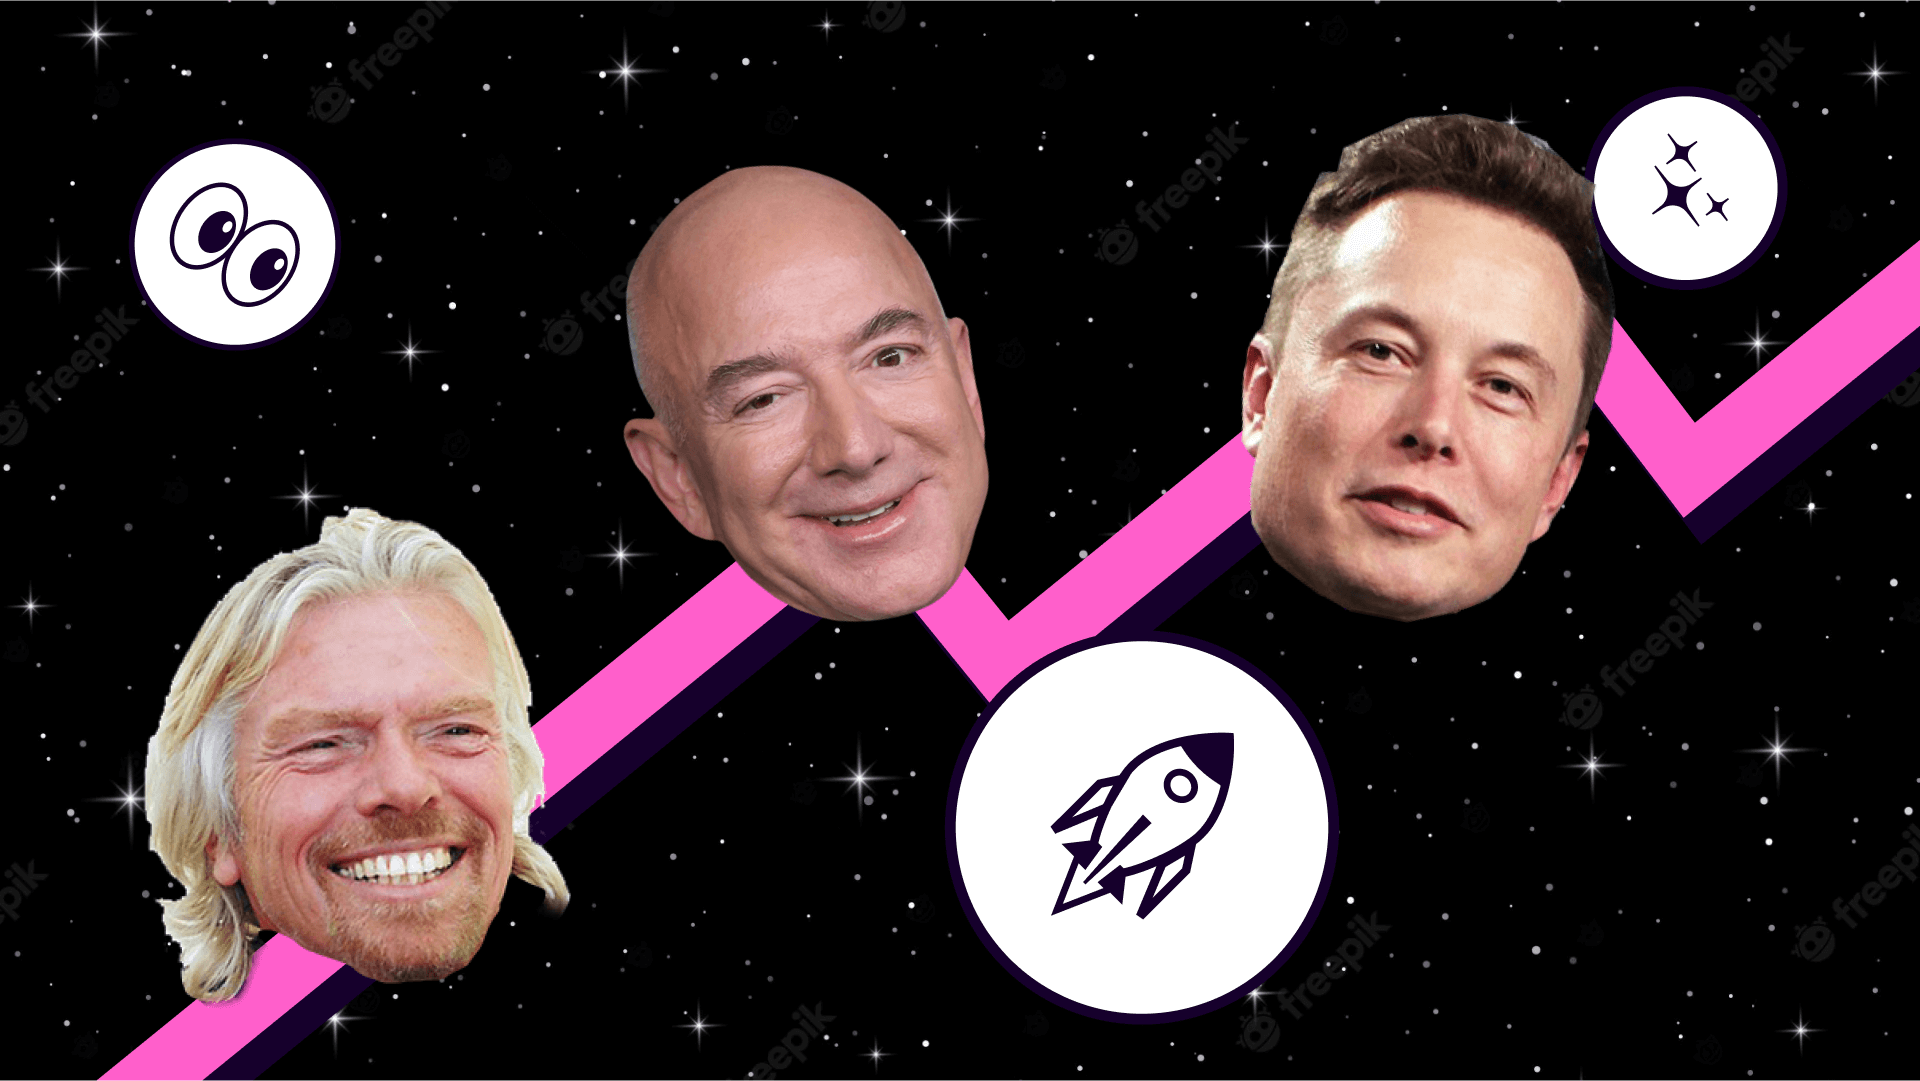 Jeff Bezos, Elon Musk and Richard Branson racing for commercial space travel